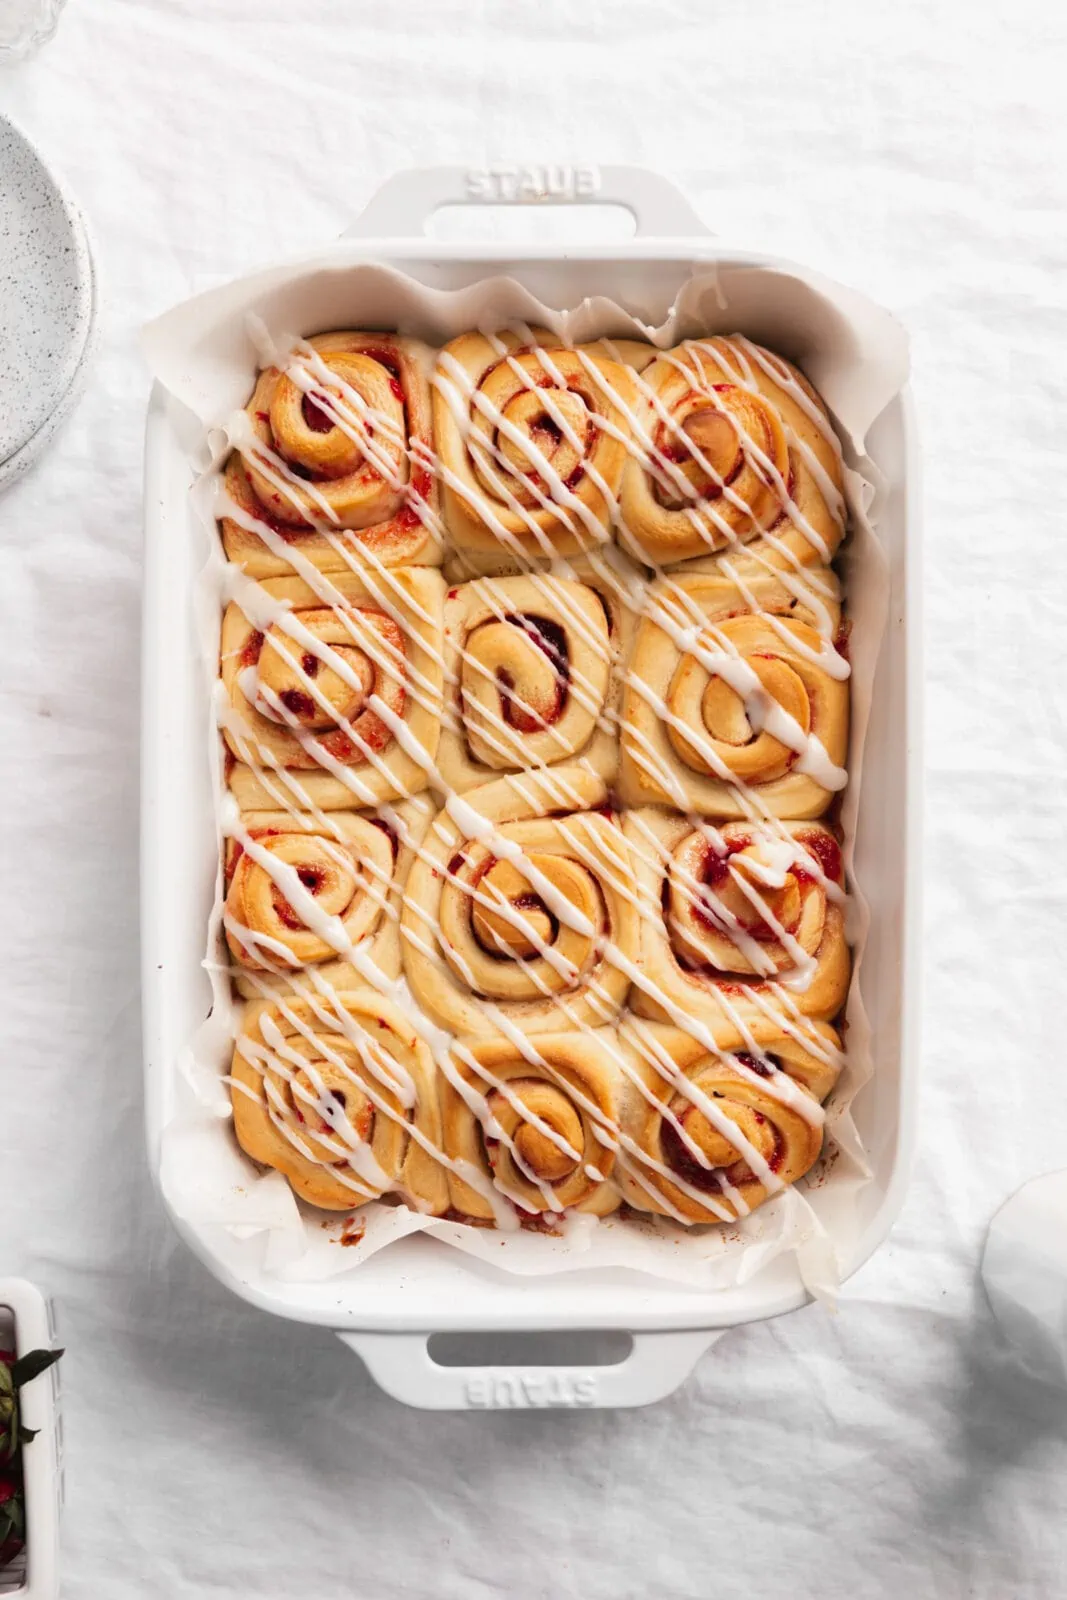 strawberry sweet rolls drizzled with frosting in a white pan